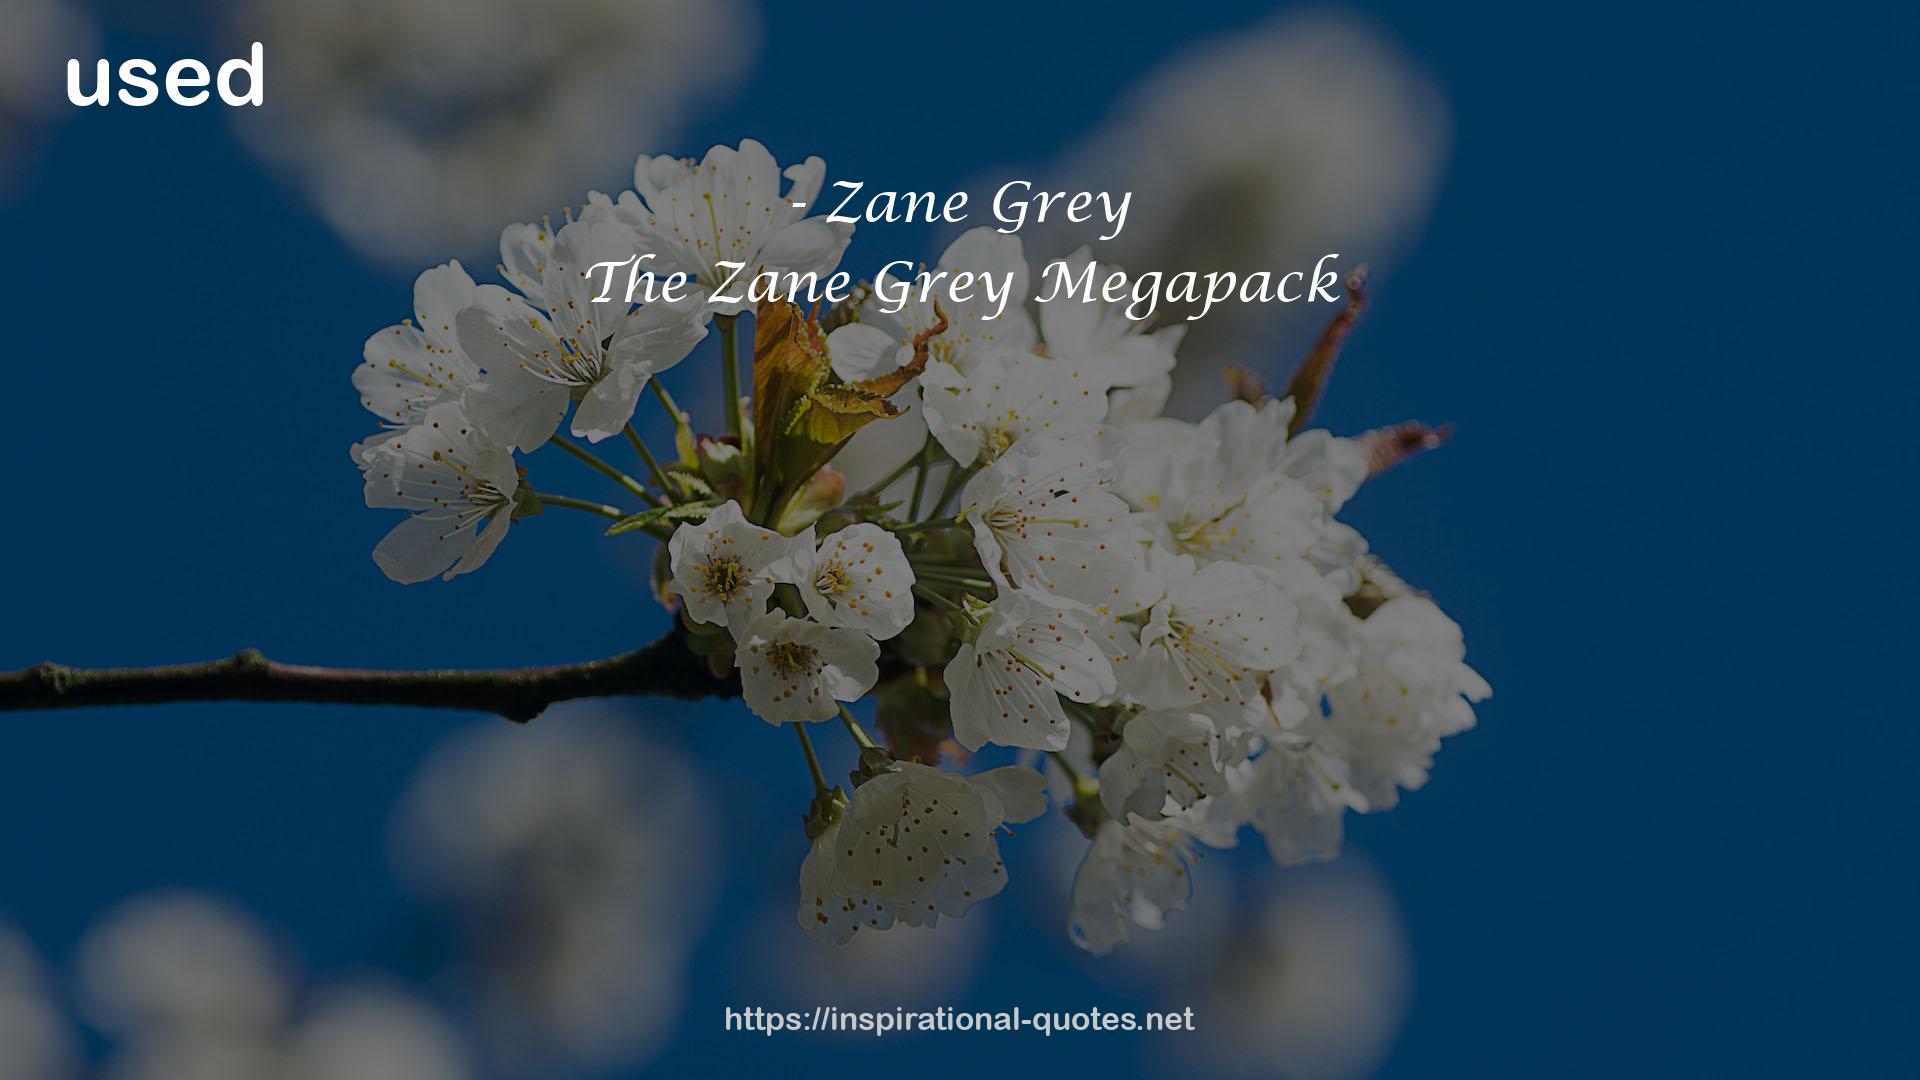 The Zane Grey Megapack QUOTES